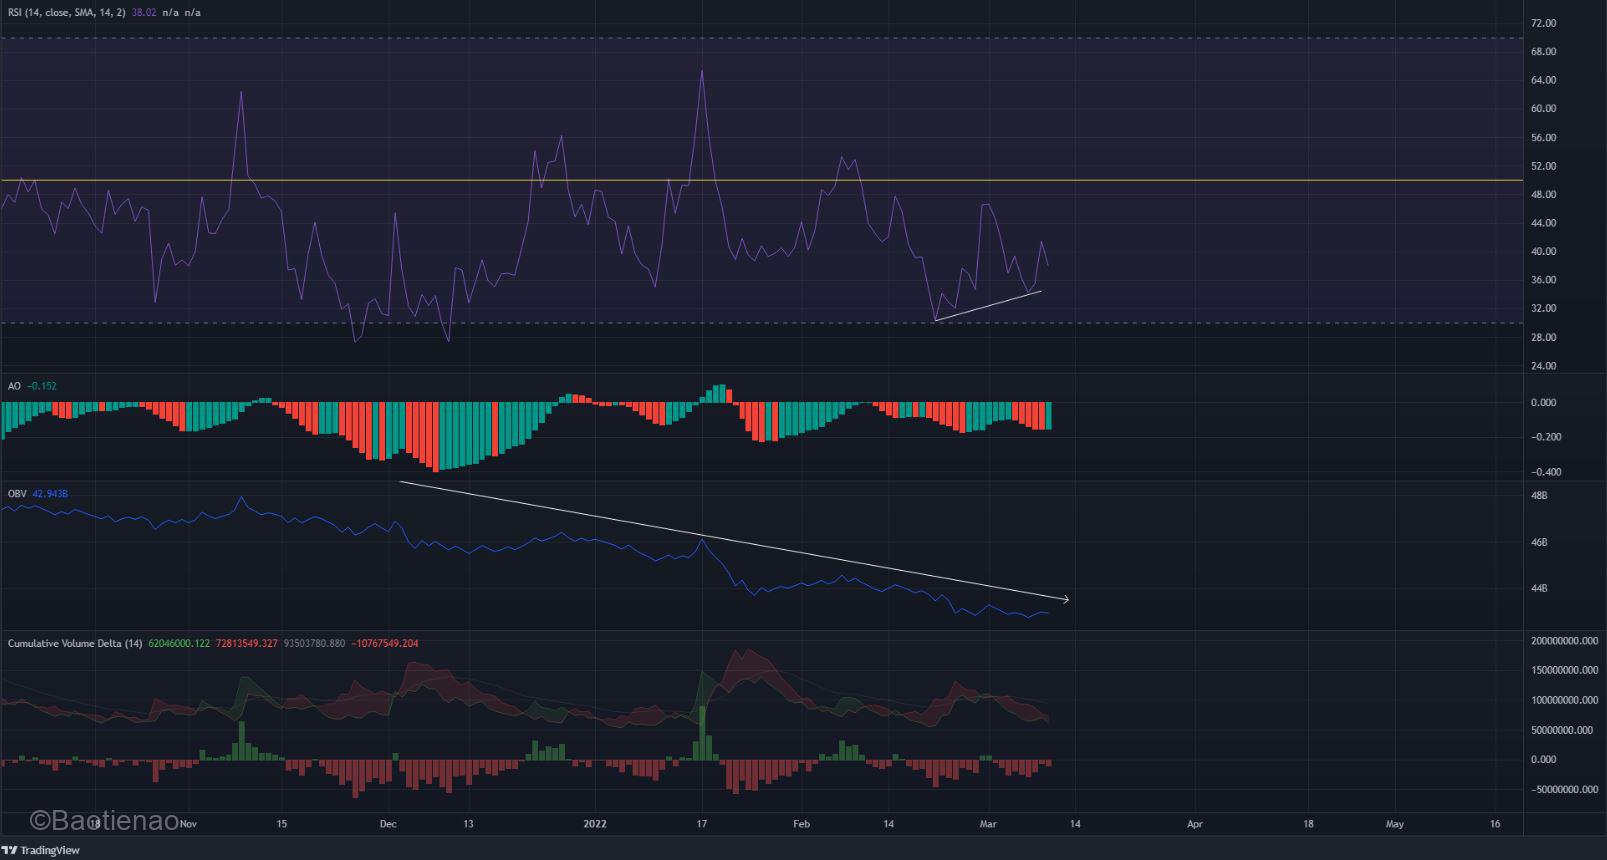 Cardano expected to continue the downtrend as buyers remain elusive